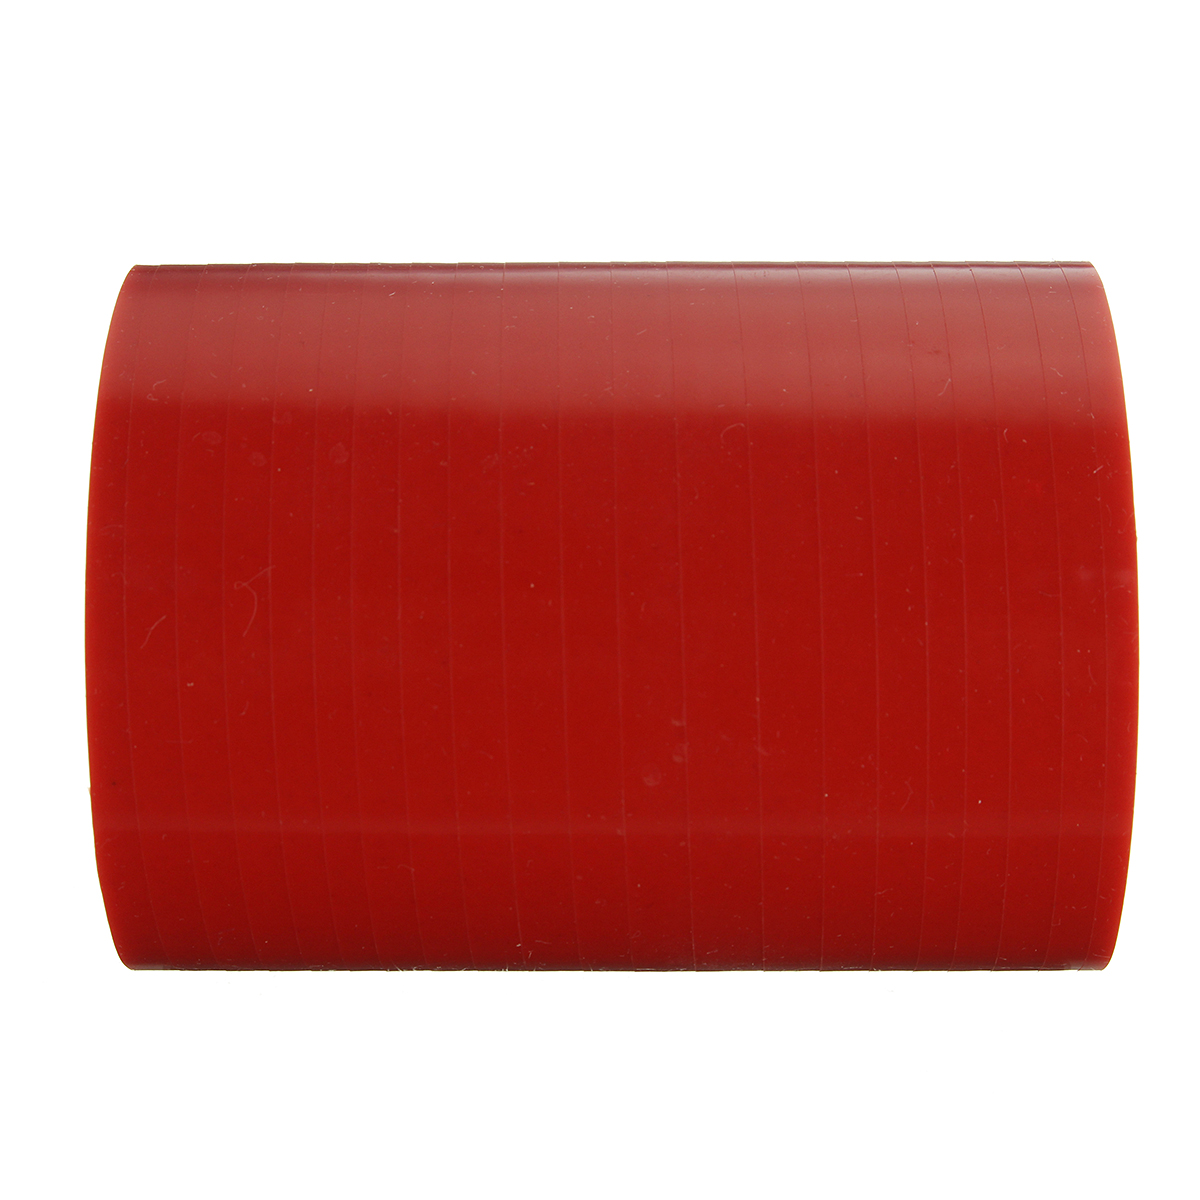 100mm-Straight-Silicone-Hose-Coupling-Connector-Silicon-Rubber-Tube-Joiner-Pipe-Ash-1619119-7